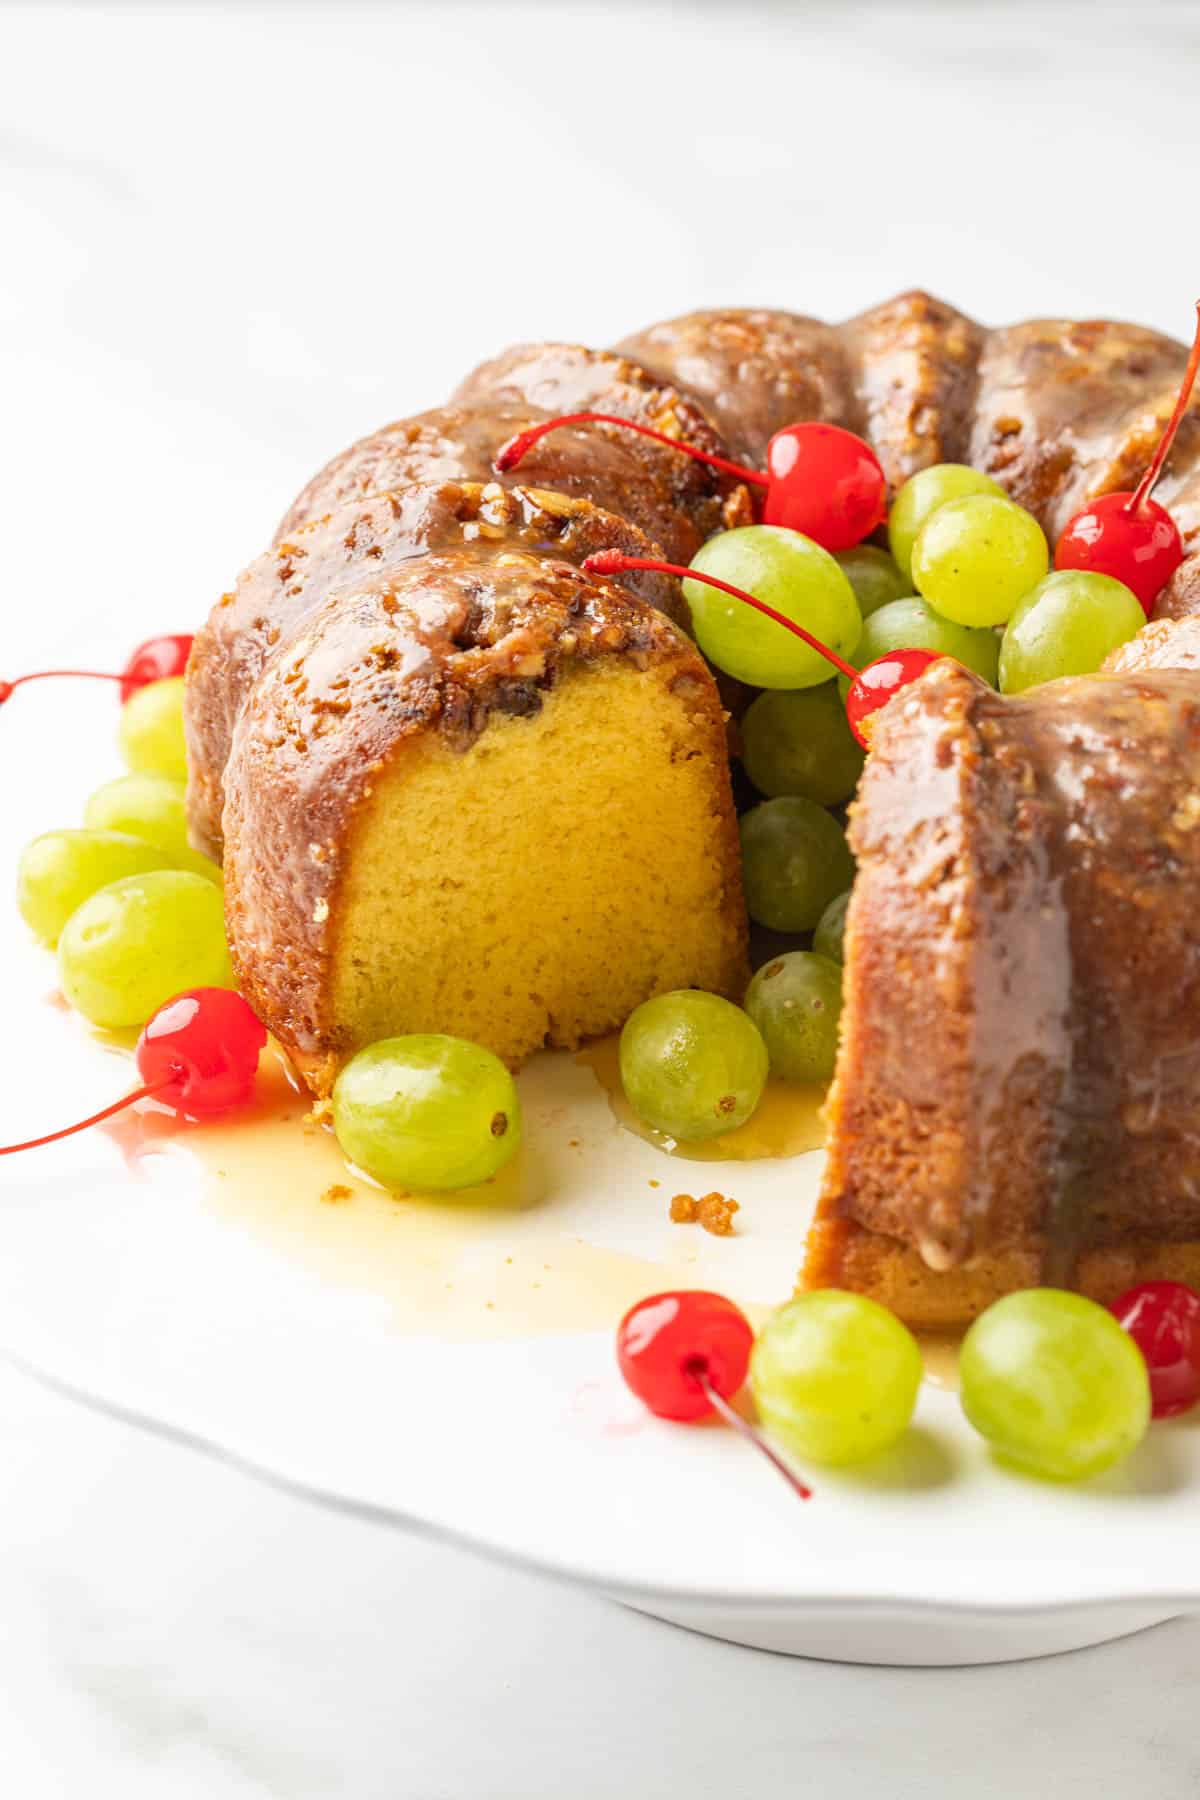 A sliced rum cake garnished with cherries and grapes on a white cake stand.